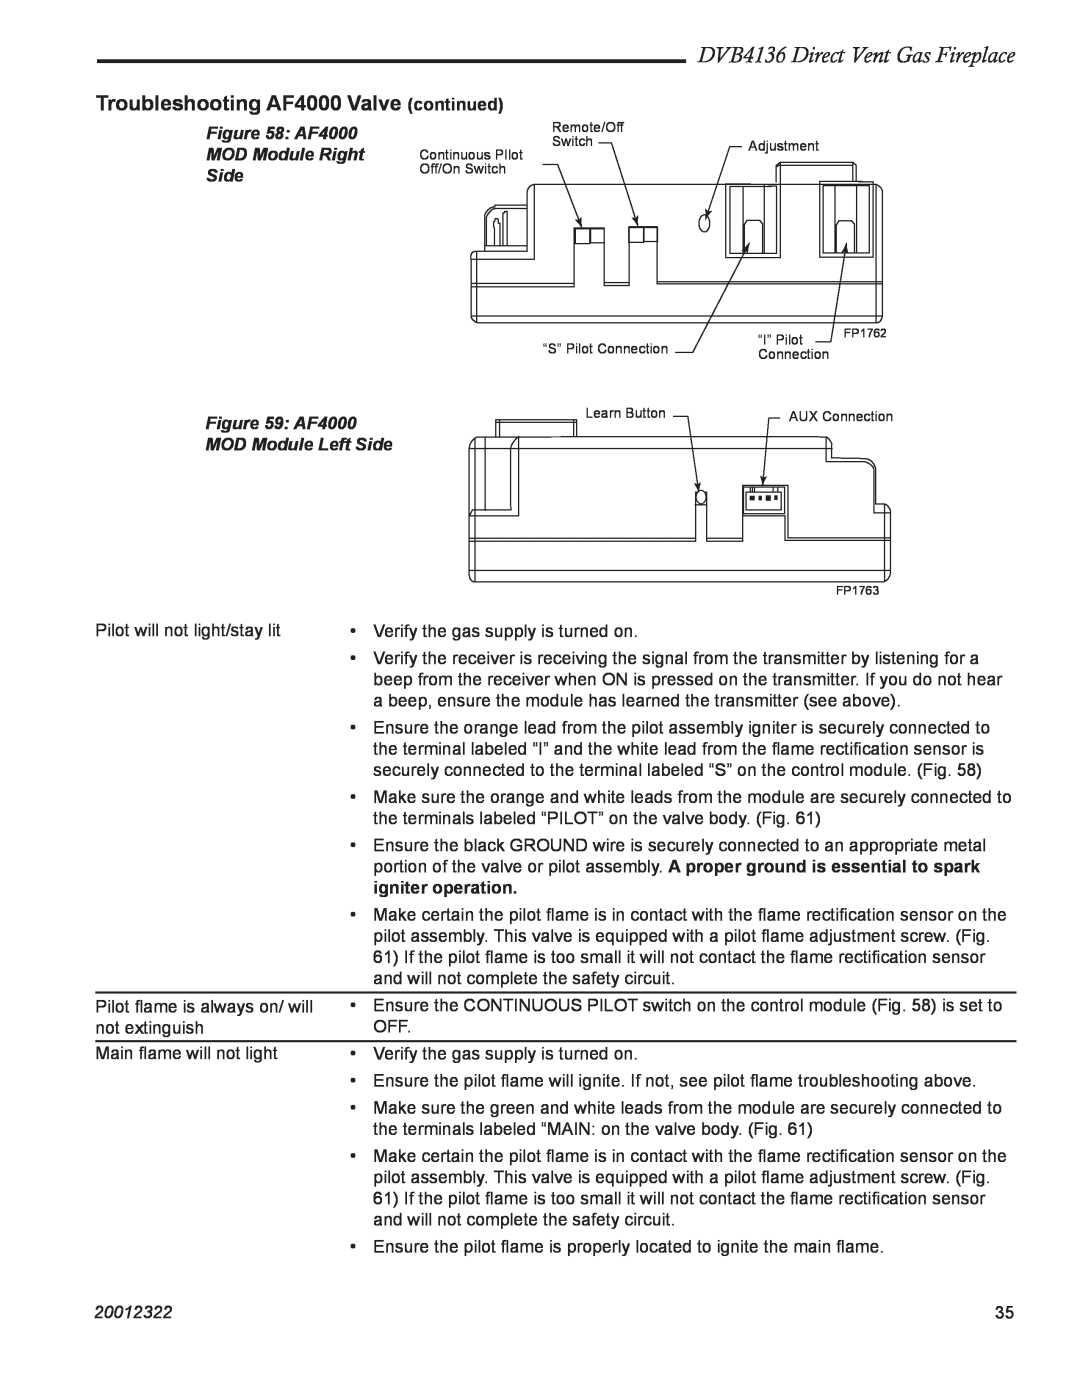 Majestic Appliances manual DVB4136 Direct Vent Gas Fireplace, Troubleshooting AF4000 Valve continued, igniter operation 